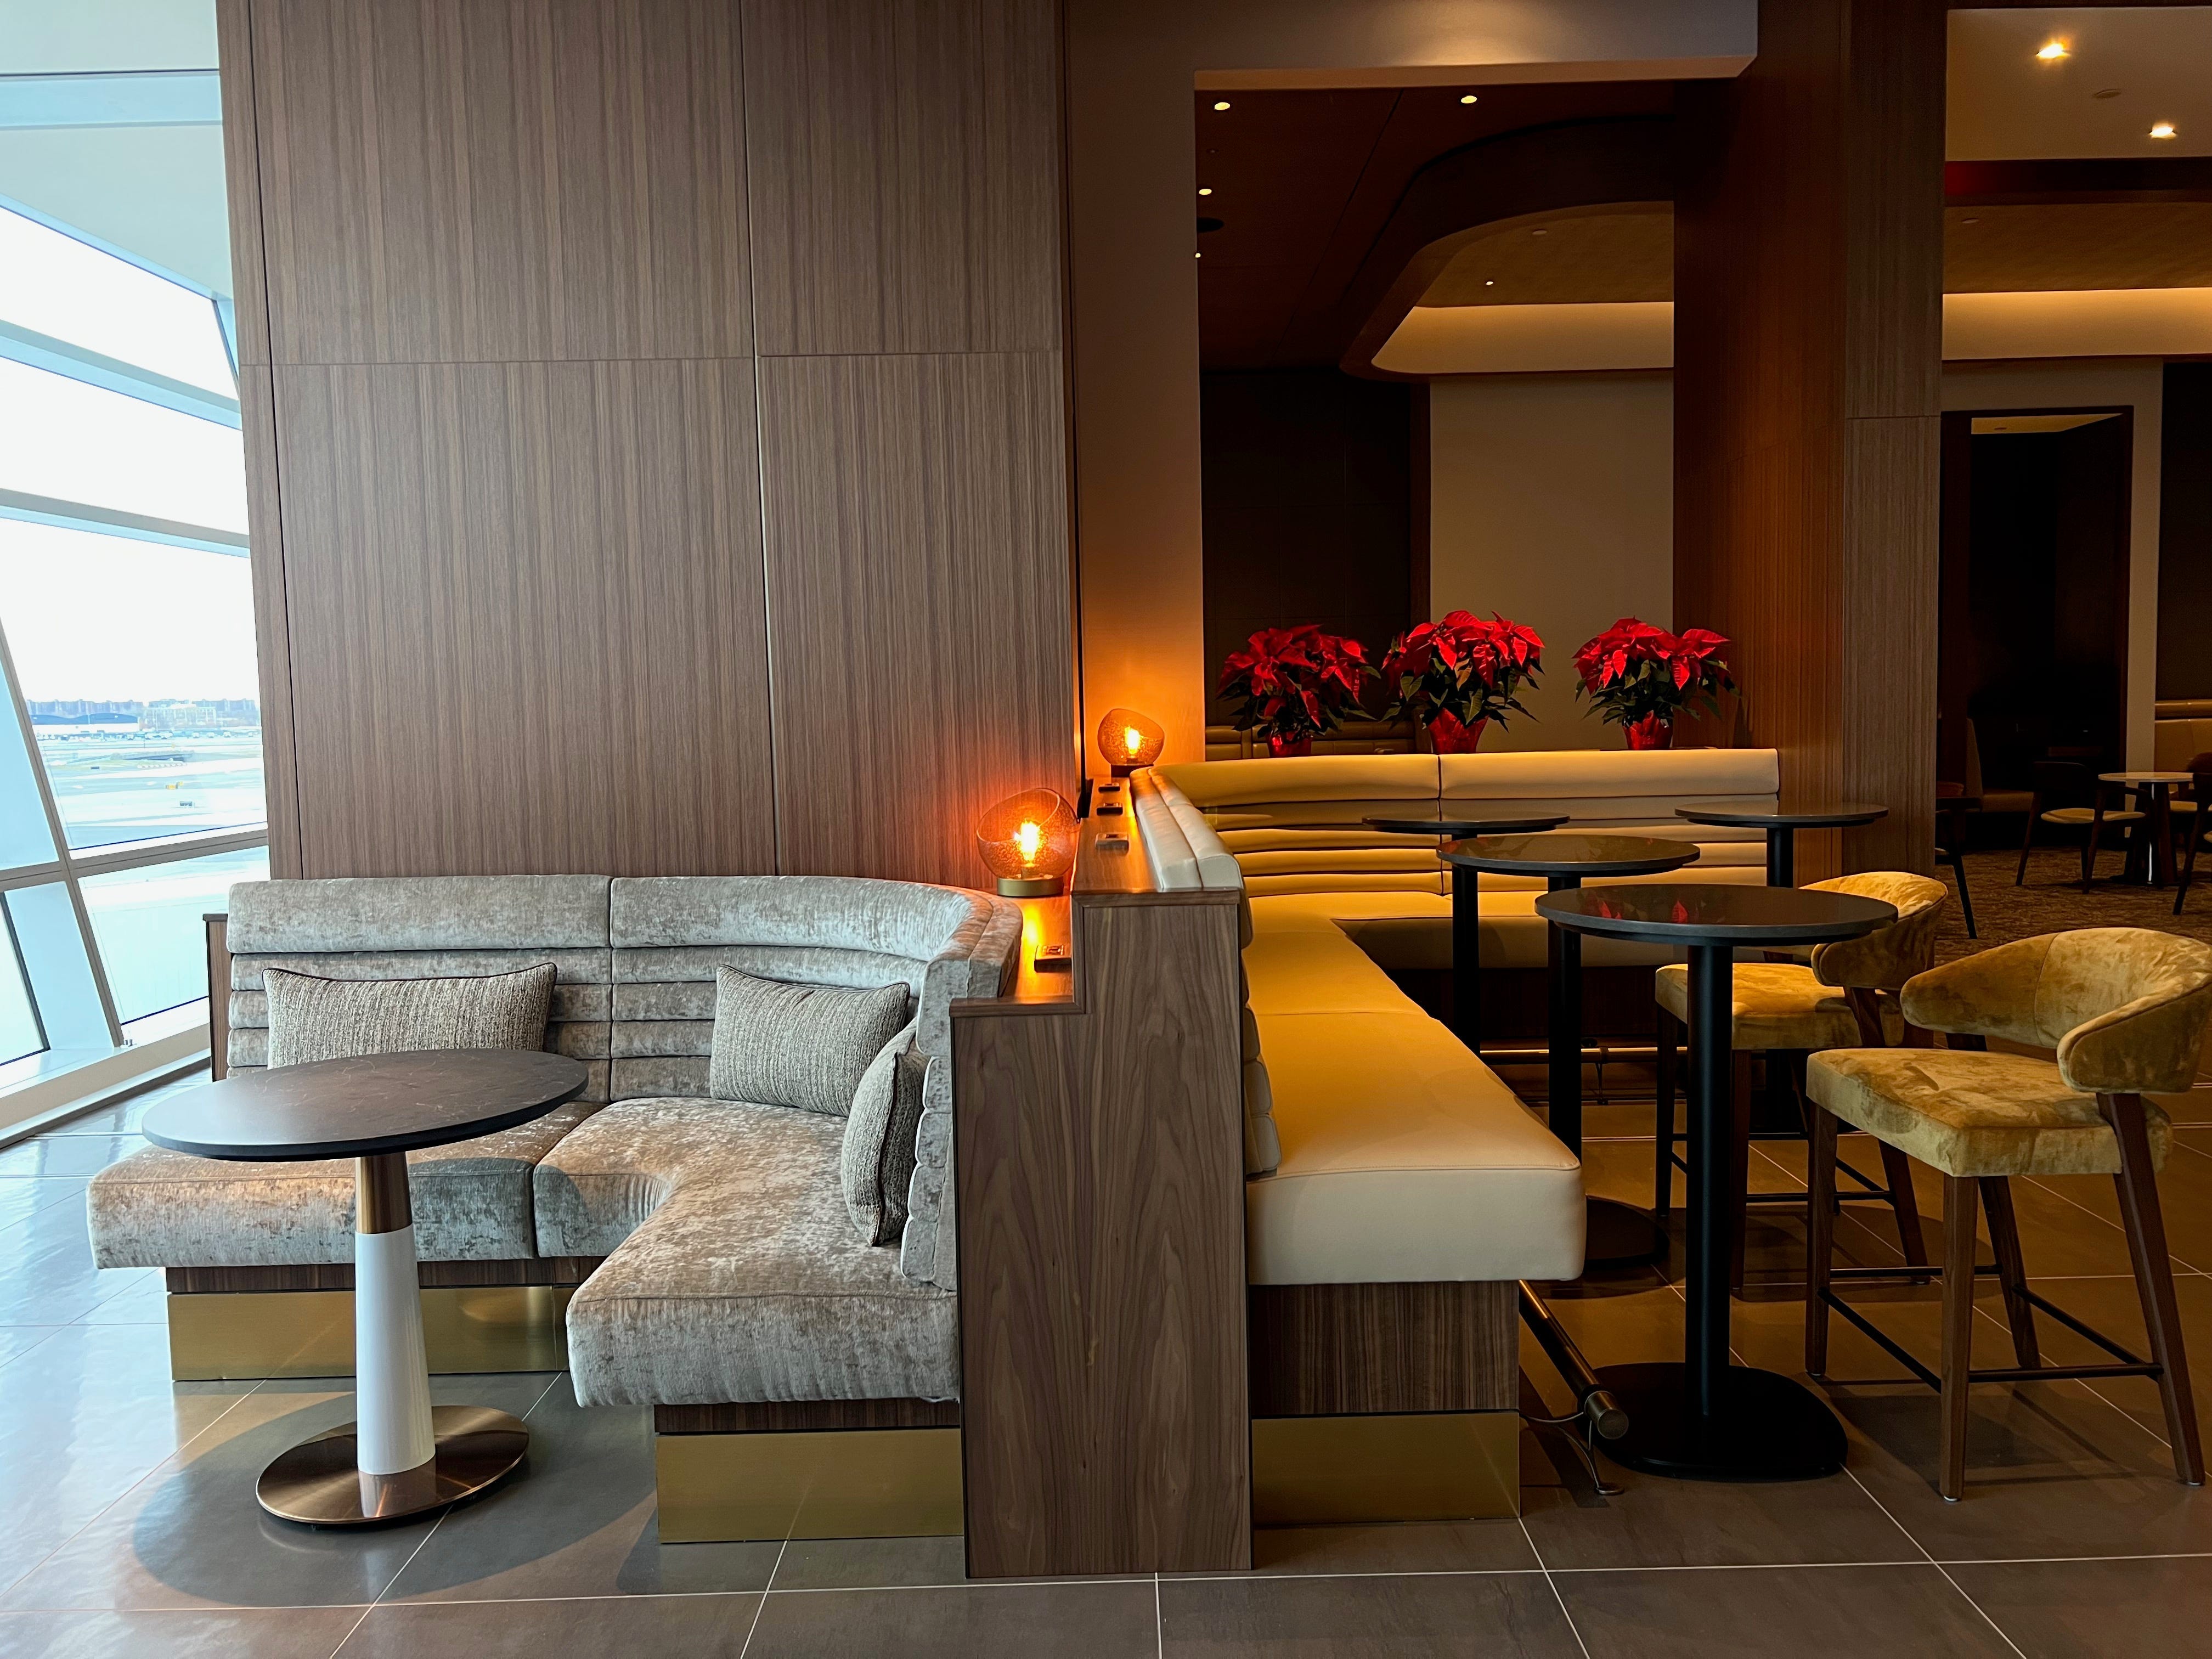 American and British Airways co-branded Soho Lounge.